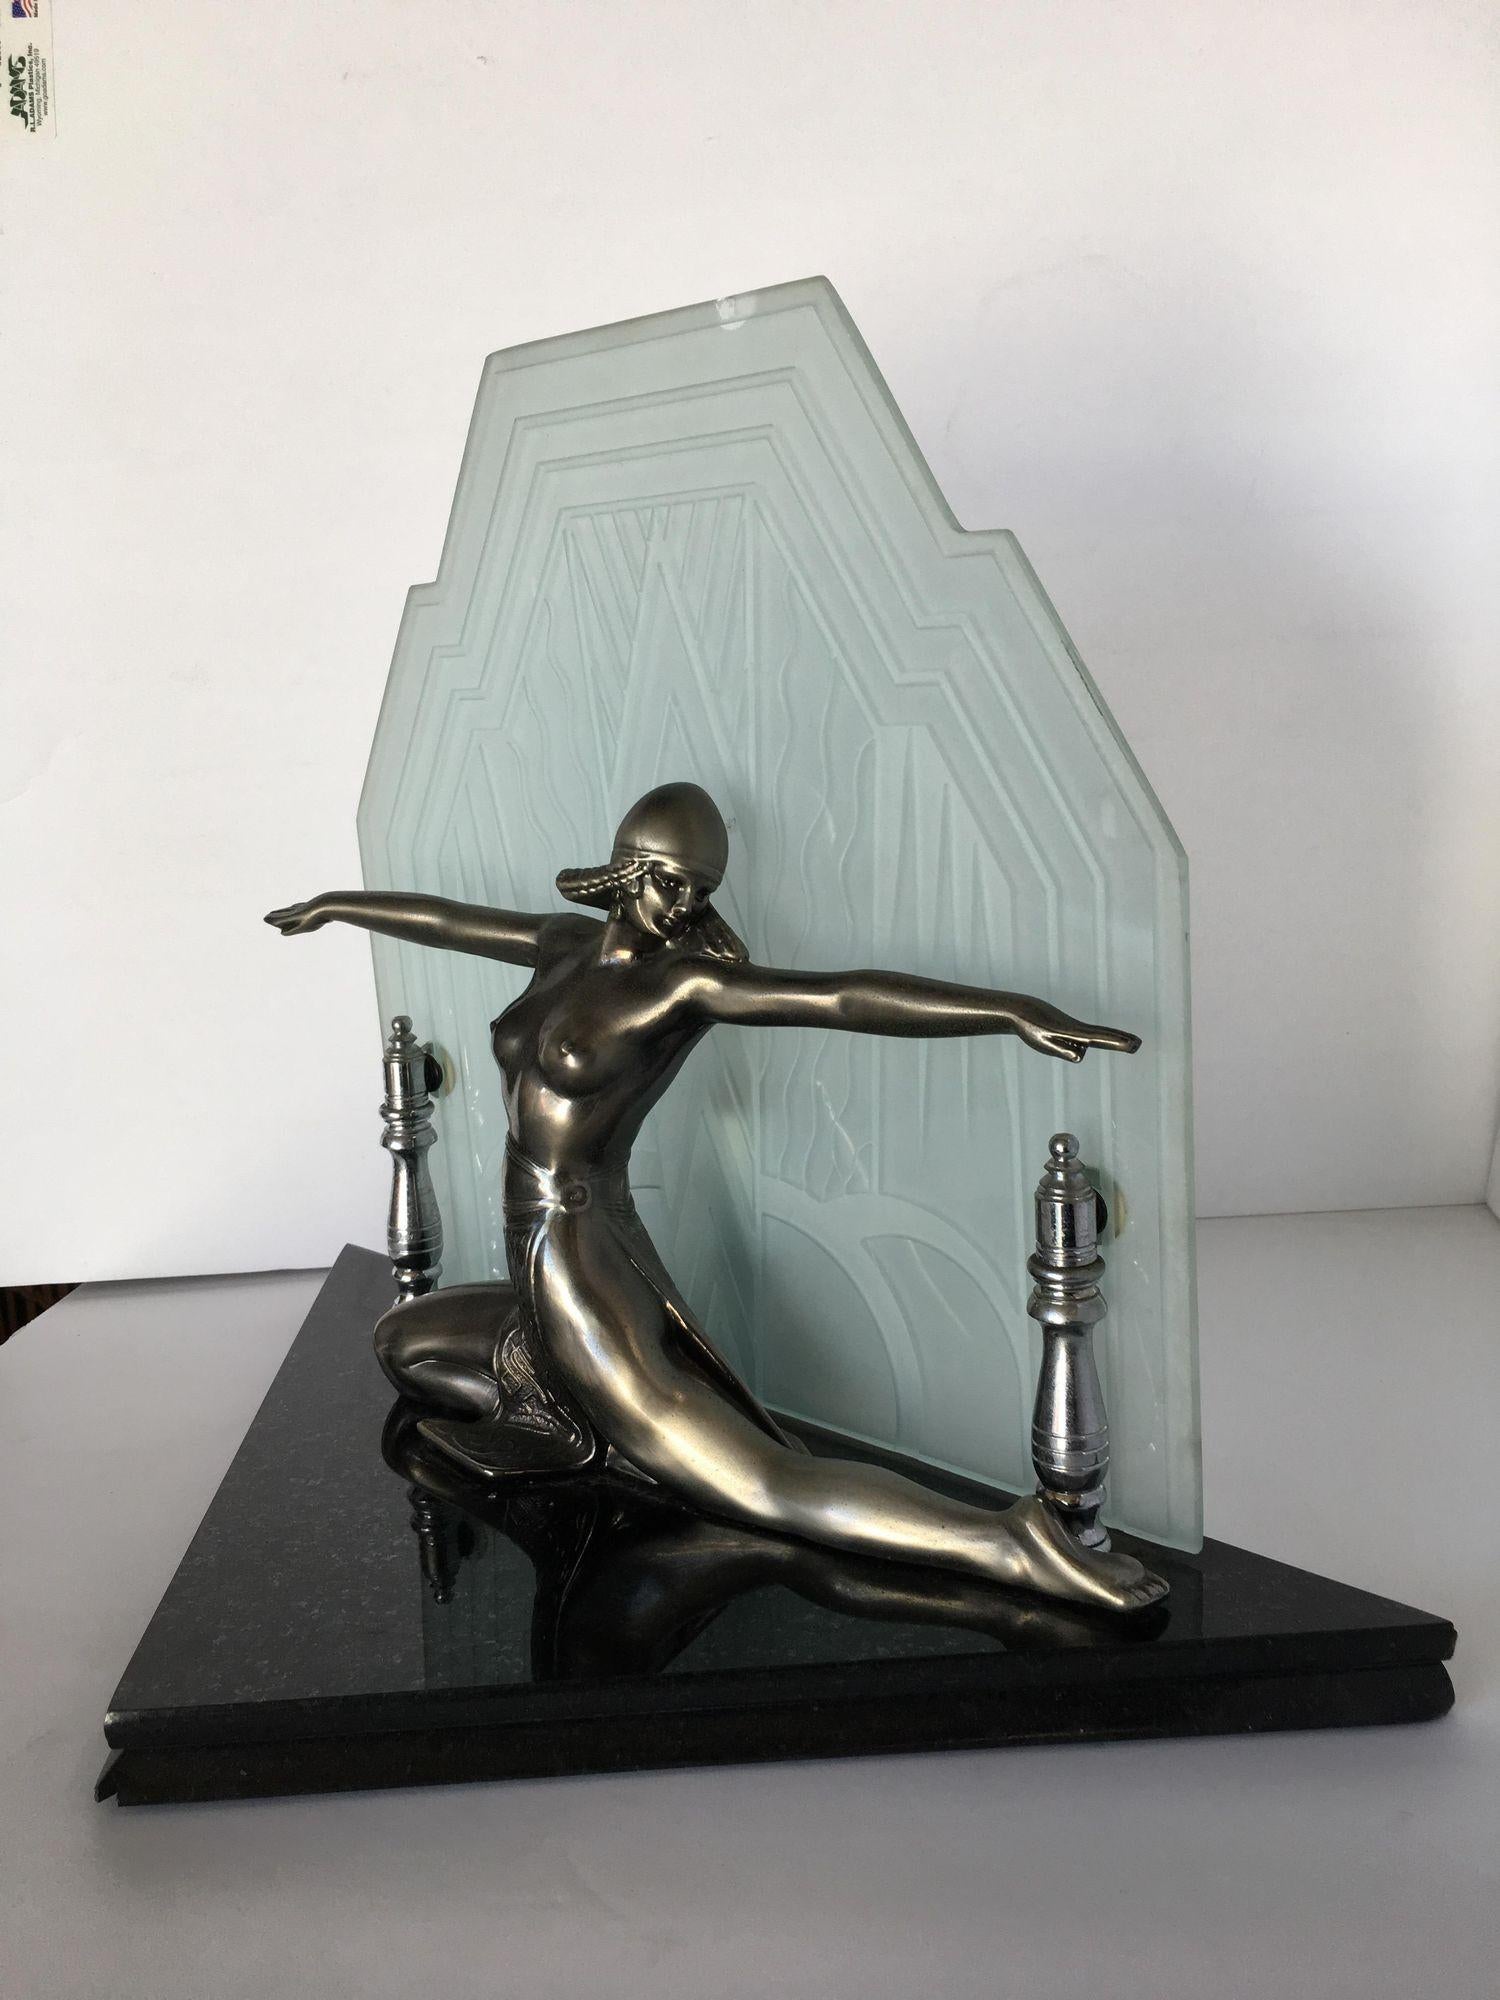 Late 20th Century Art Deco Revival Chrome Art Deco Cleopatra Lamp with Etched Glass Shade For Sale